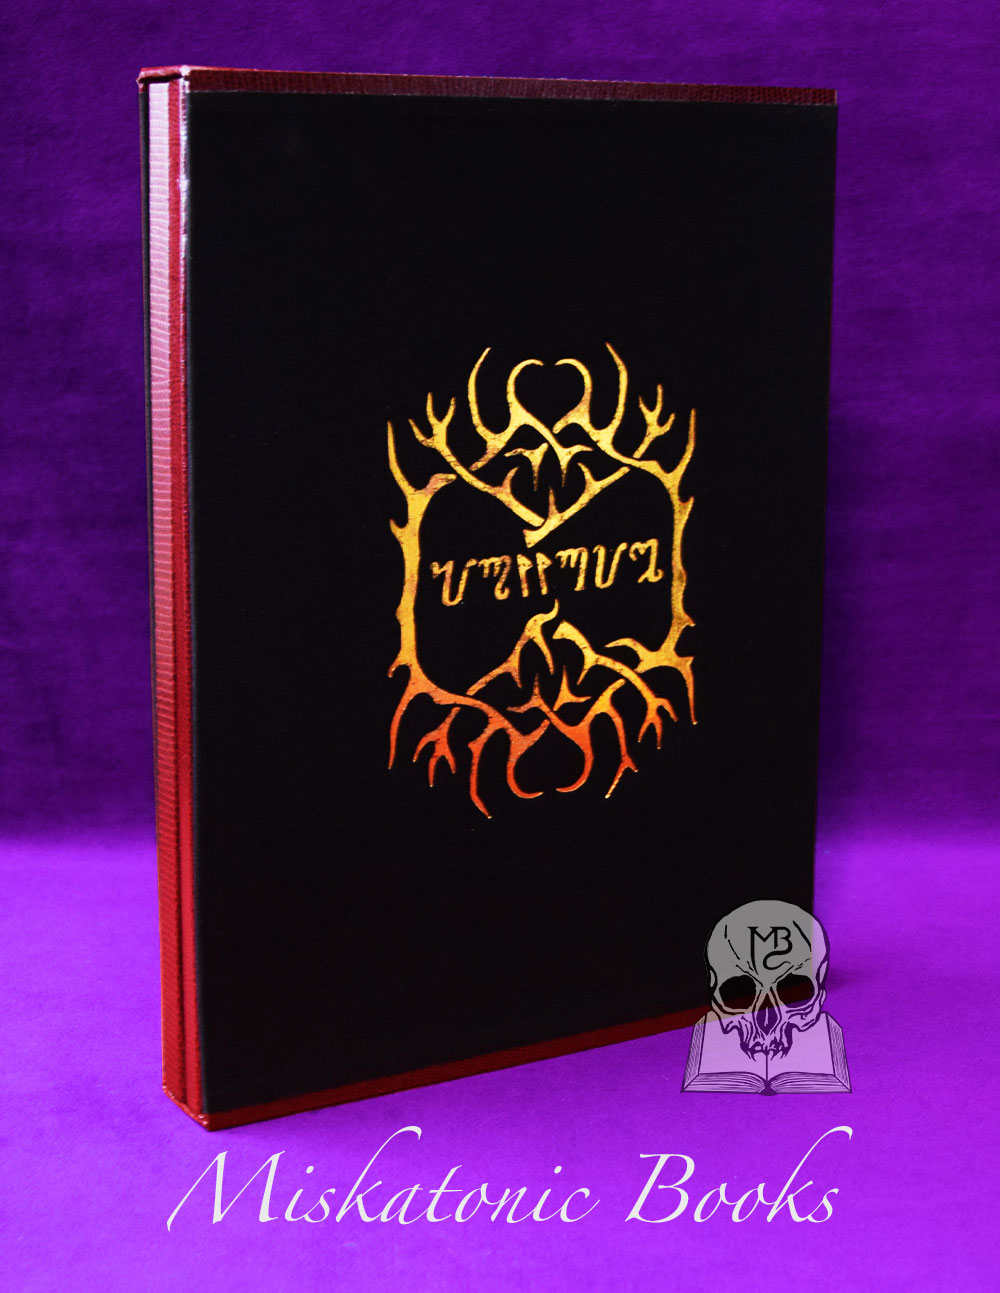 THE WITCHCRAFT CONFESSIONS OF ISOBEL GOWDIE with Introduced by Melissa Seims & Dr. John Callow - Two Volume Limited Edition Hardcover in Custom Slipcase